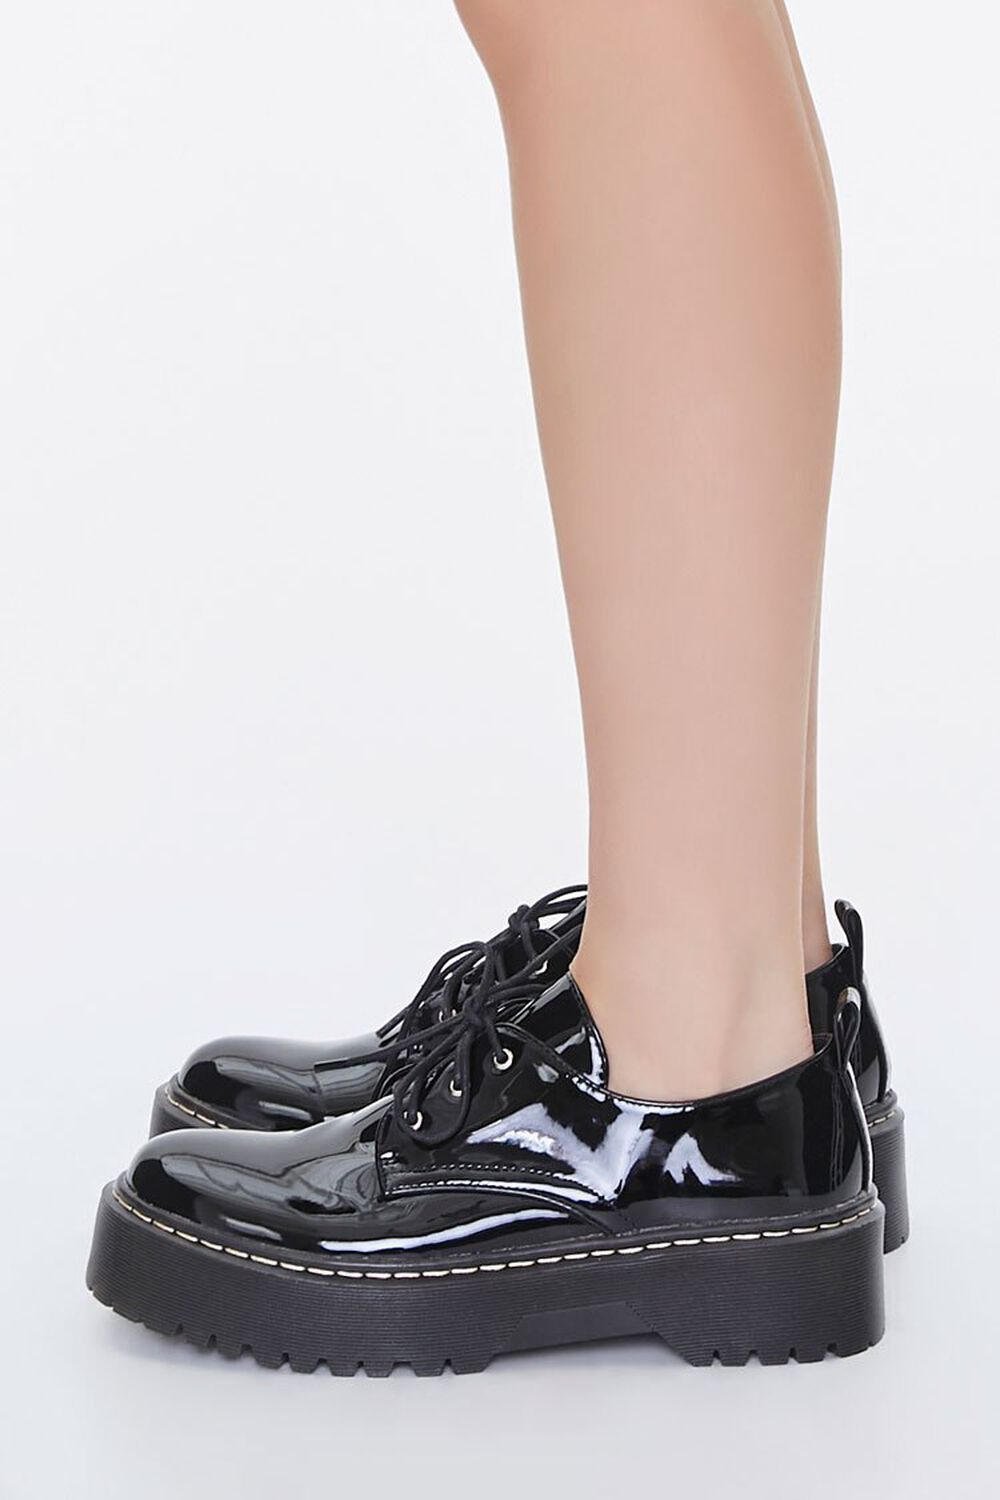 Faux Patent Leather Oxfords, image 2